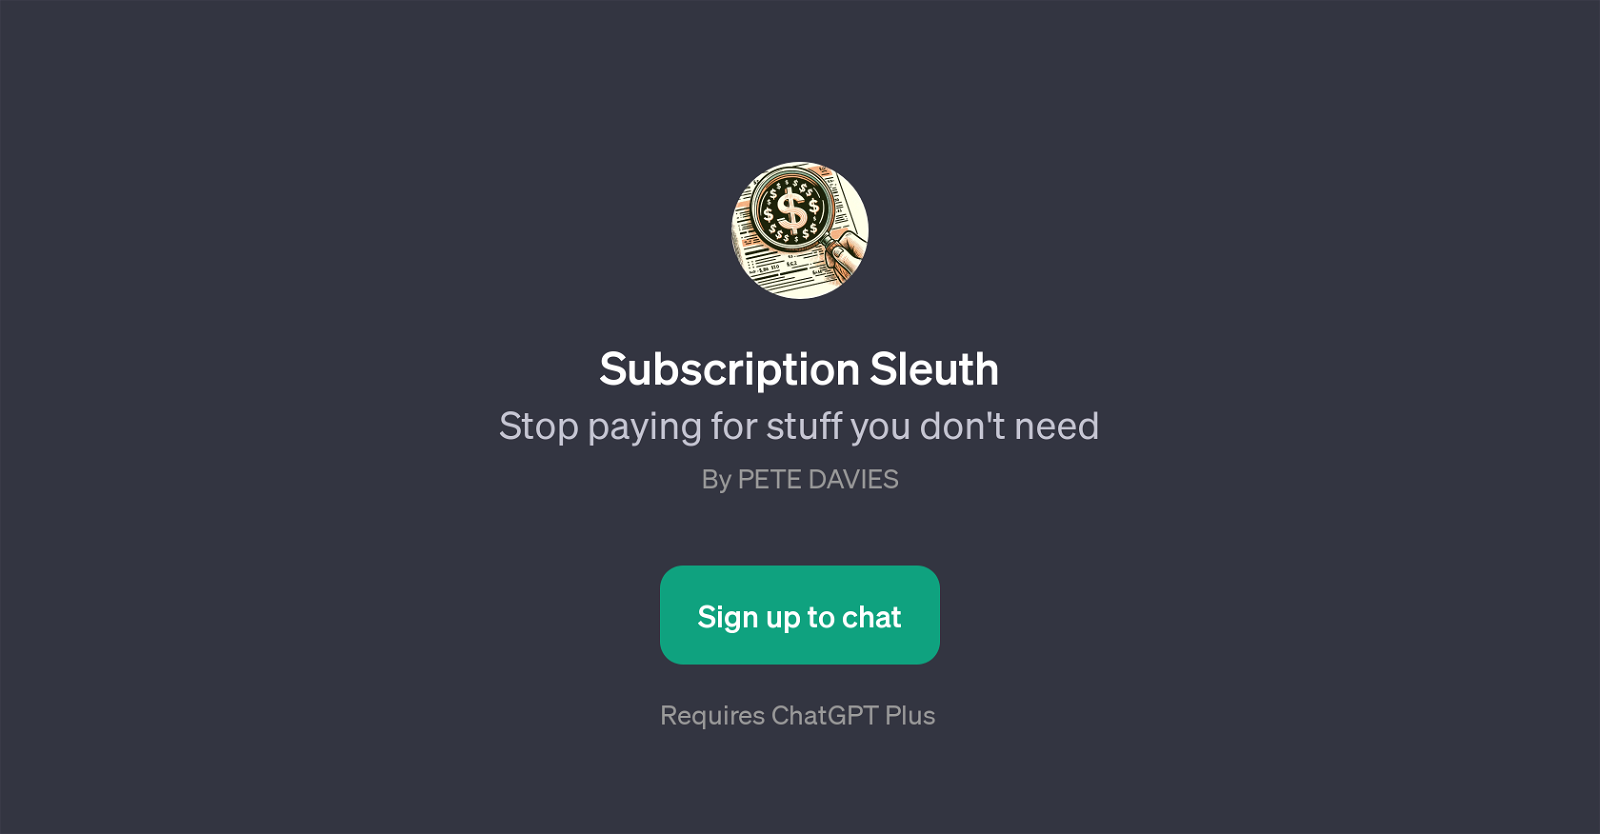 Subscription Sleuth website